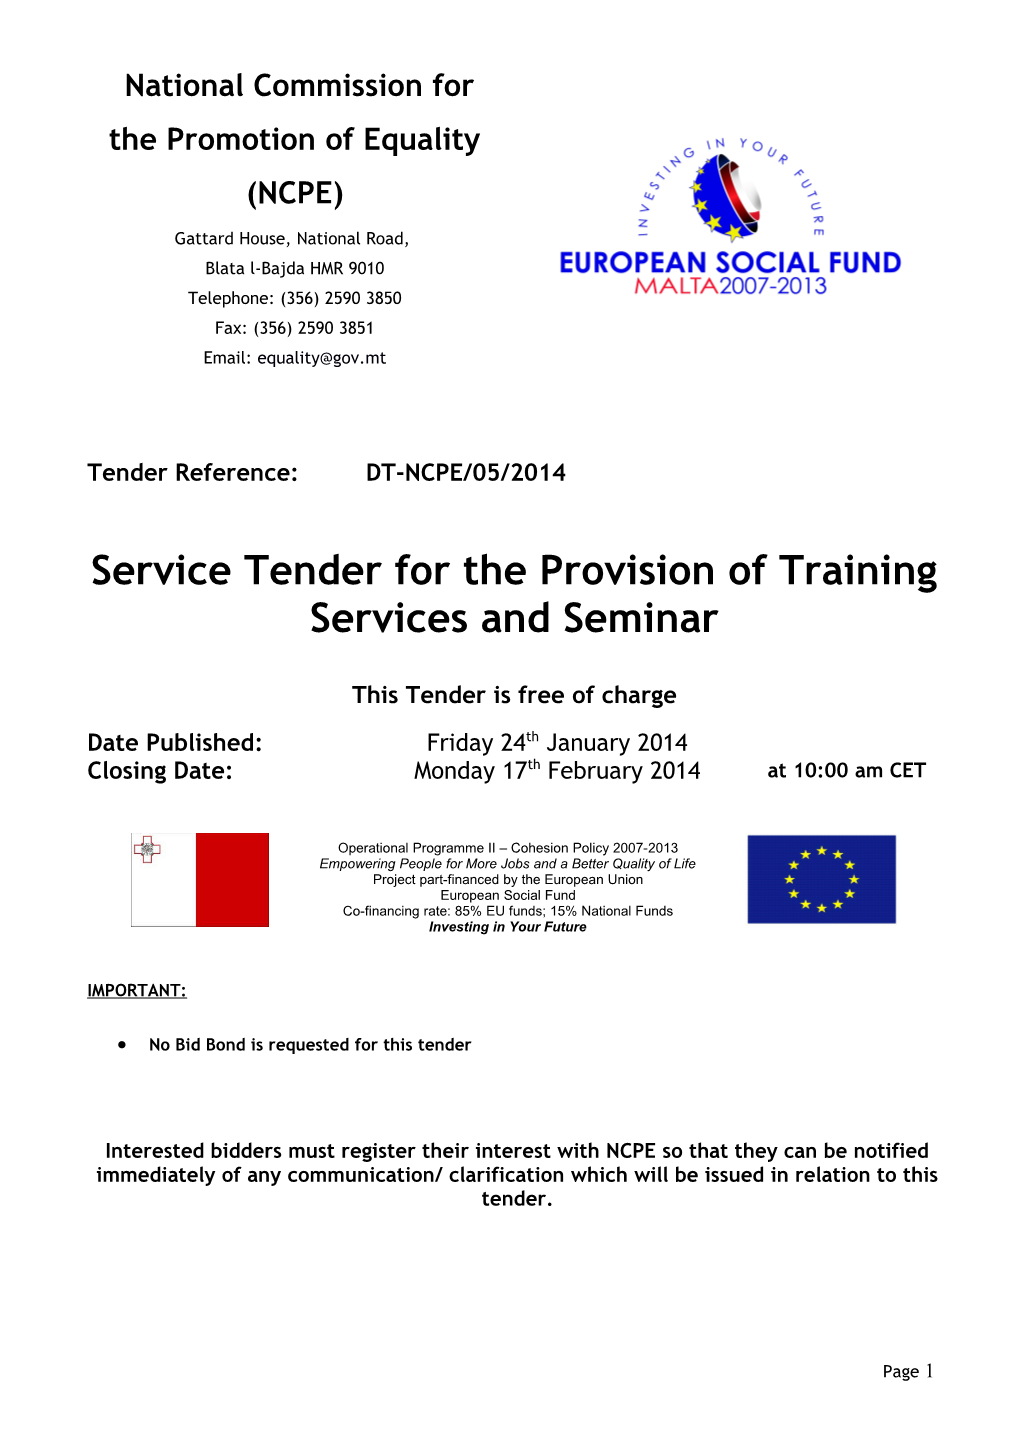 Service Tender for the Provision of Training Services